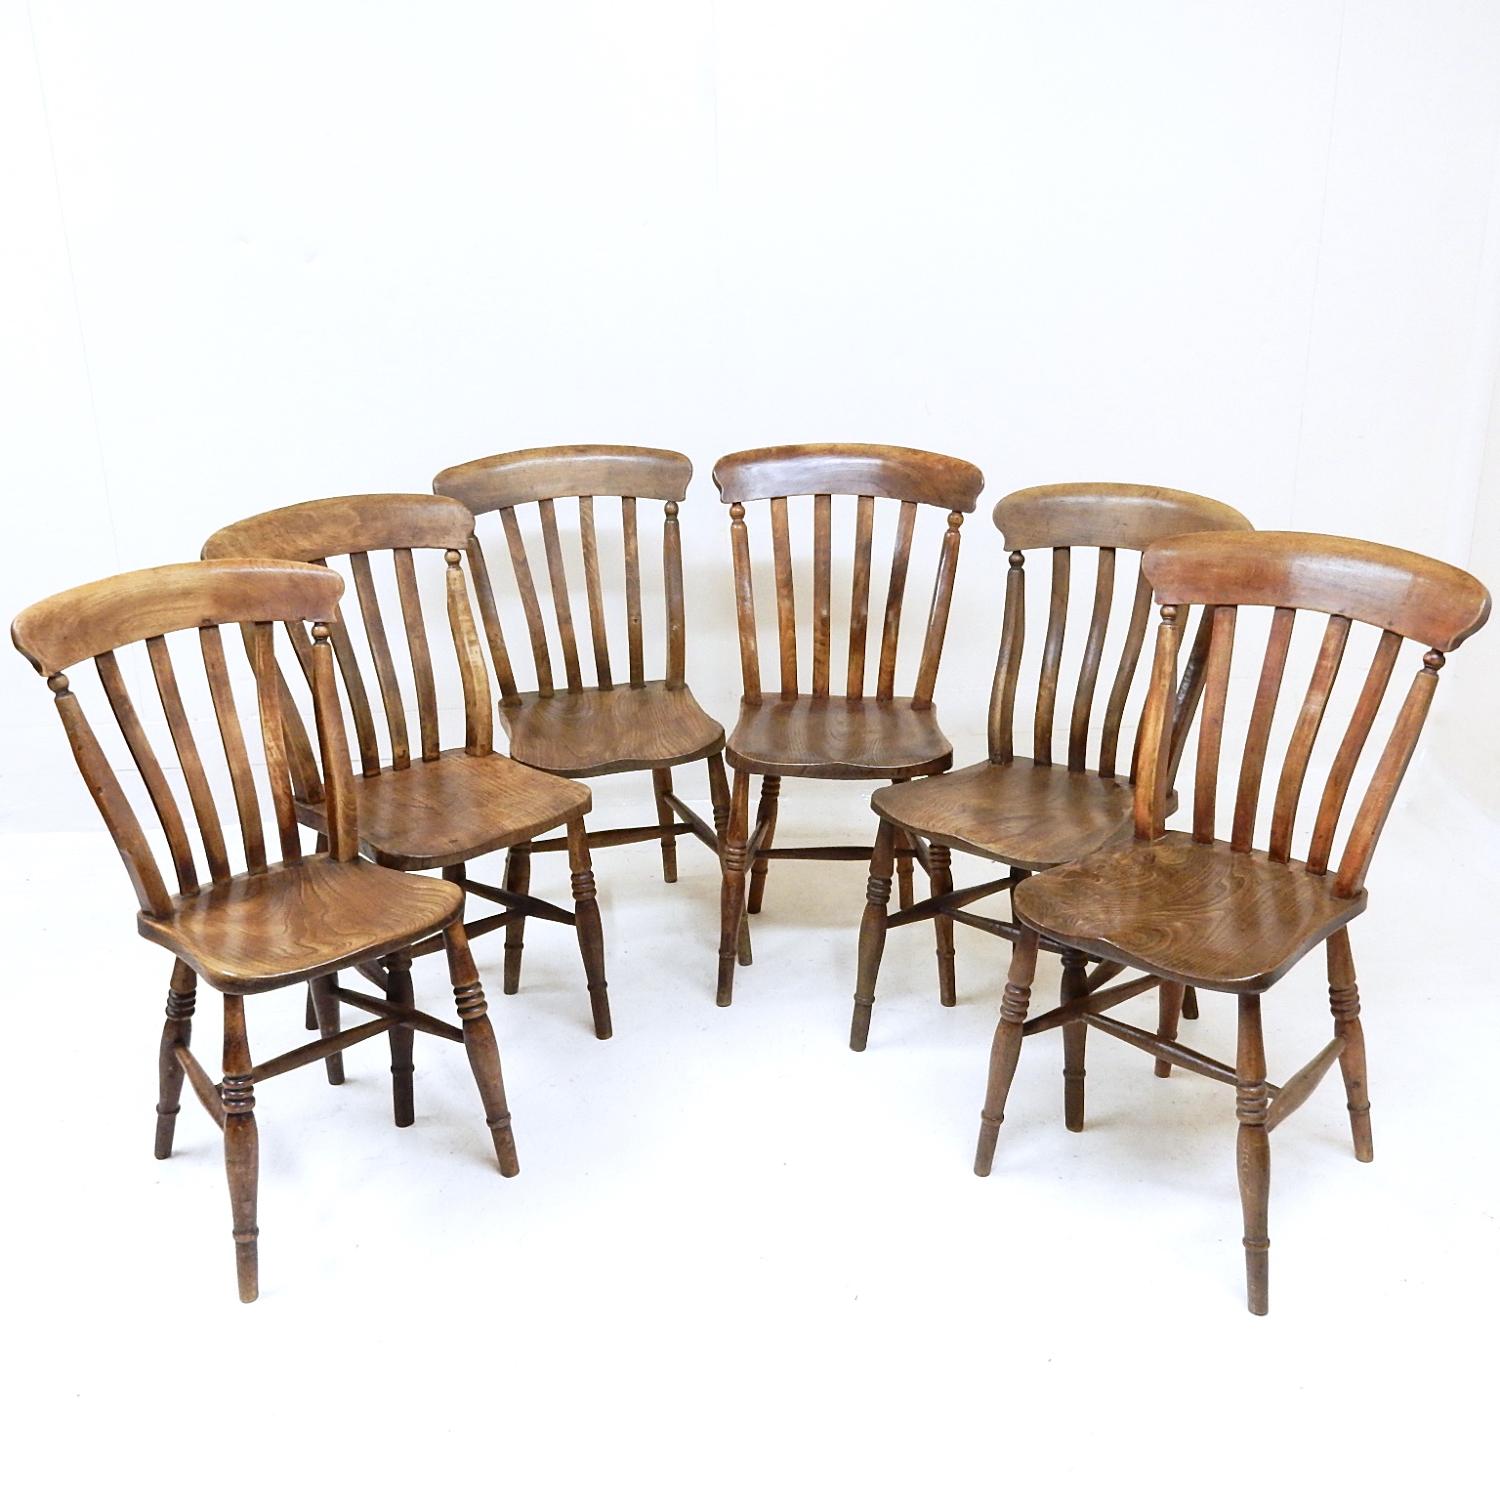 C19th Windsor Kitchen Chairs